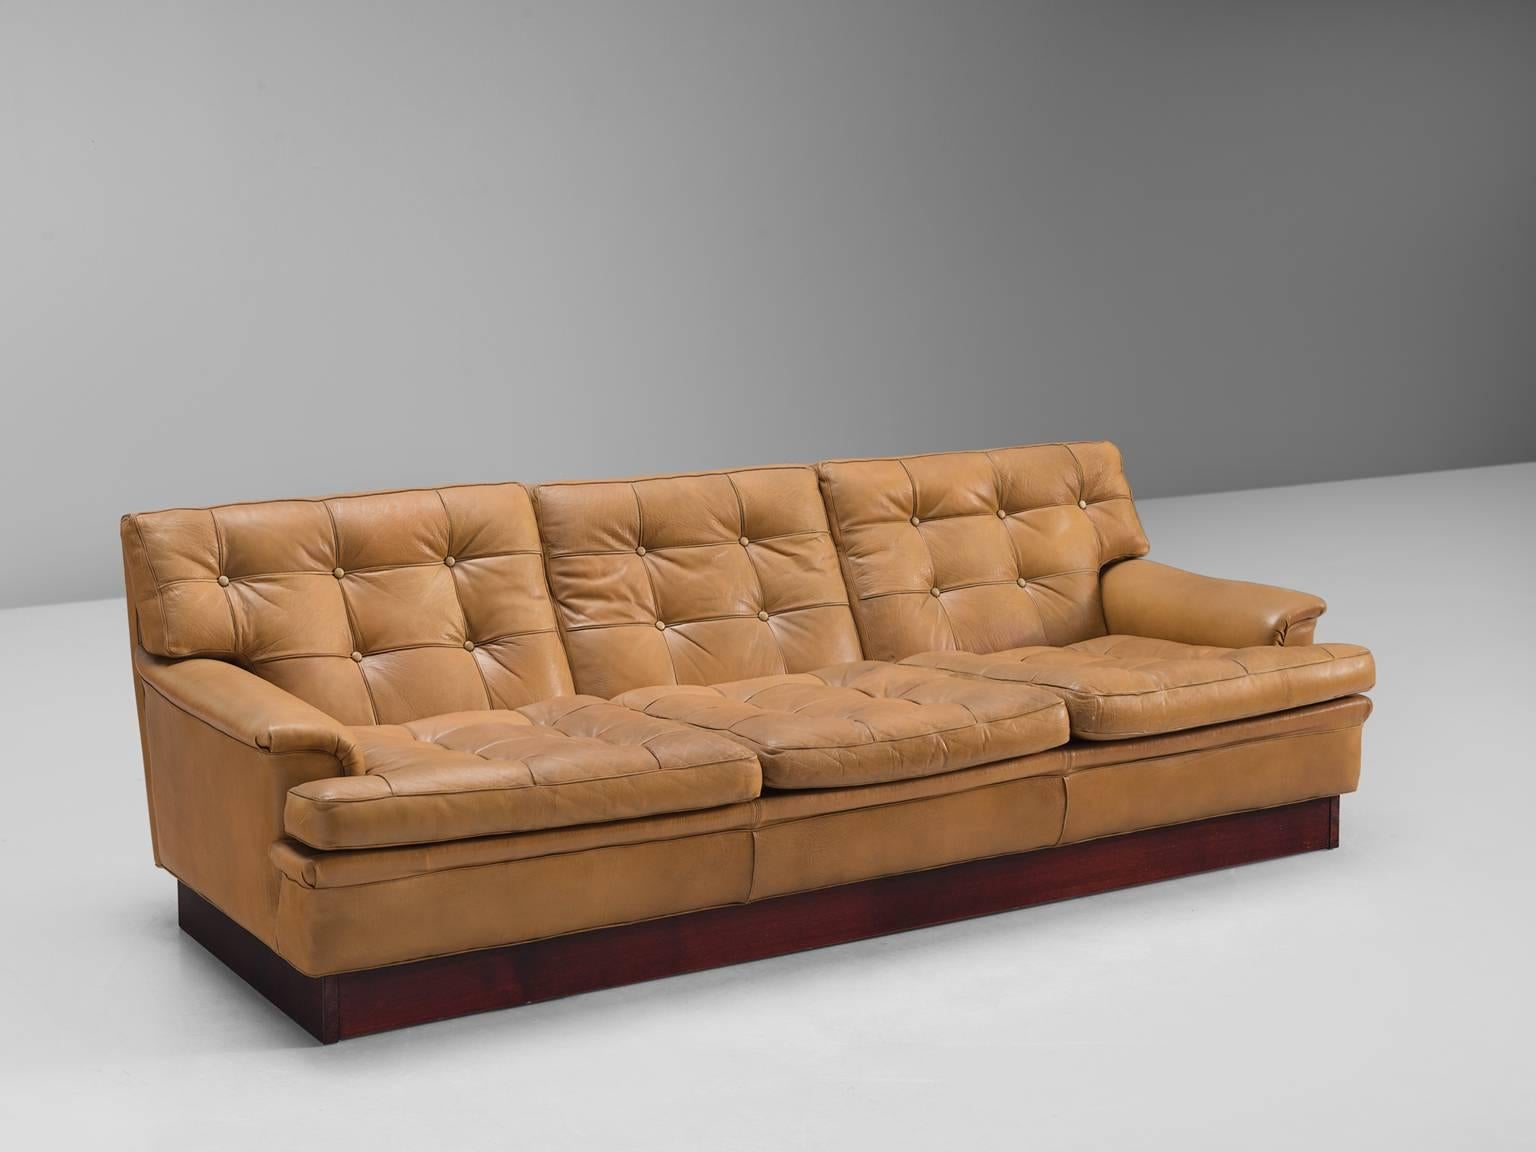 Arne Norell, sofa, leather and wood, Sweden, 1970s.

This comfortable Swedish sofa in leather and wood. This comfortable sofa is designed by the Swede Arne Norell and holds a robust, sturdy character. The base is made of a unified wooden foot in